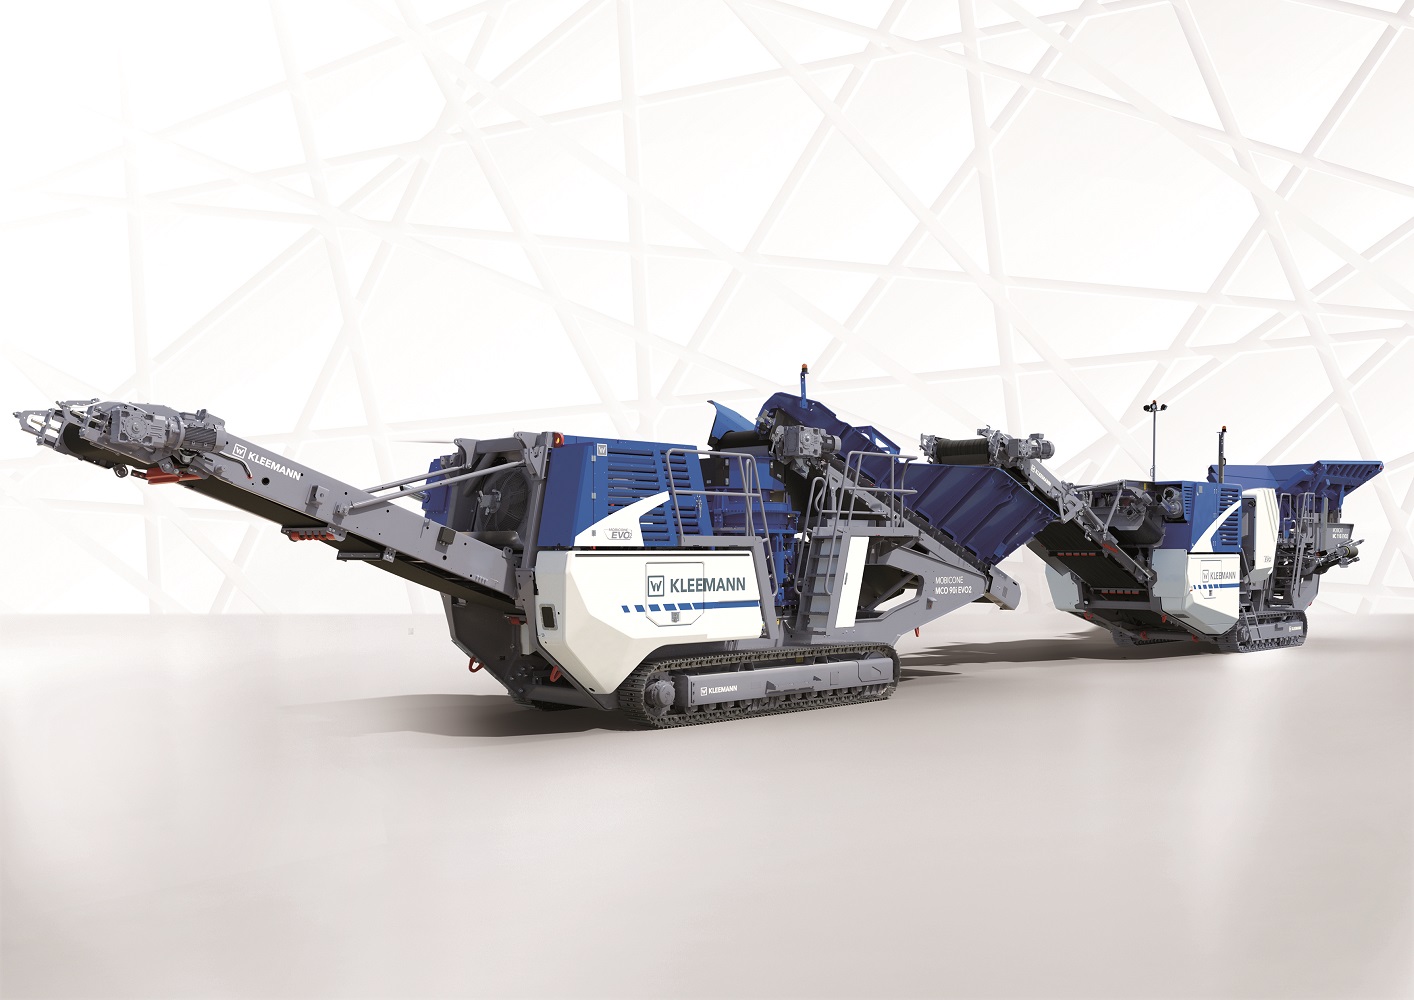 High performance individually or as a team: the cone crusher MOBICONE MCO 90(i) EVO2 and the jaw crusher MOBICAT MC 110(i) EVO2 from Kleemann.